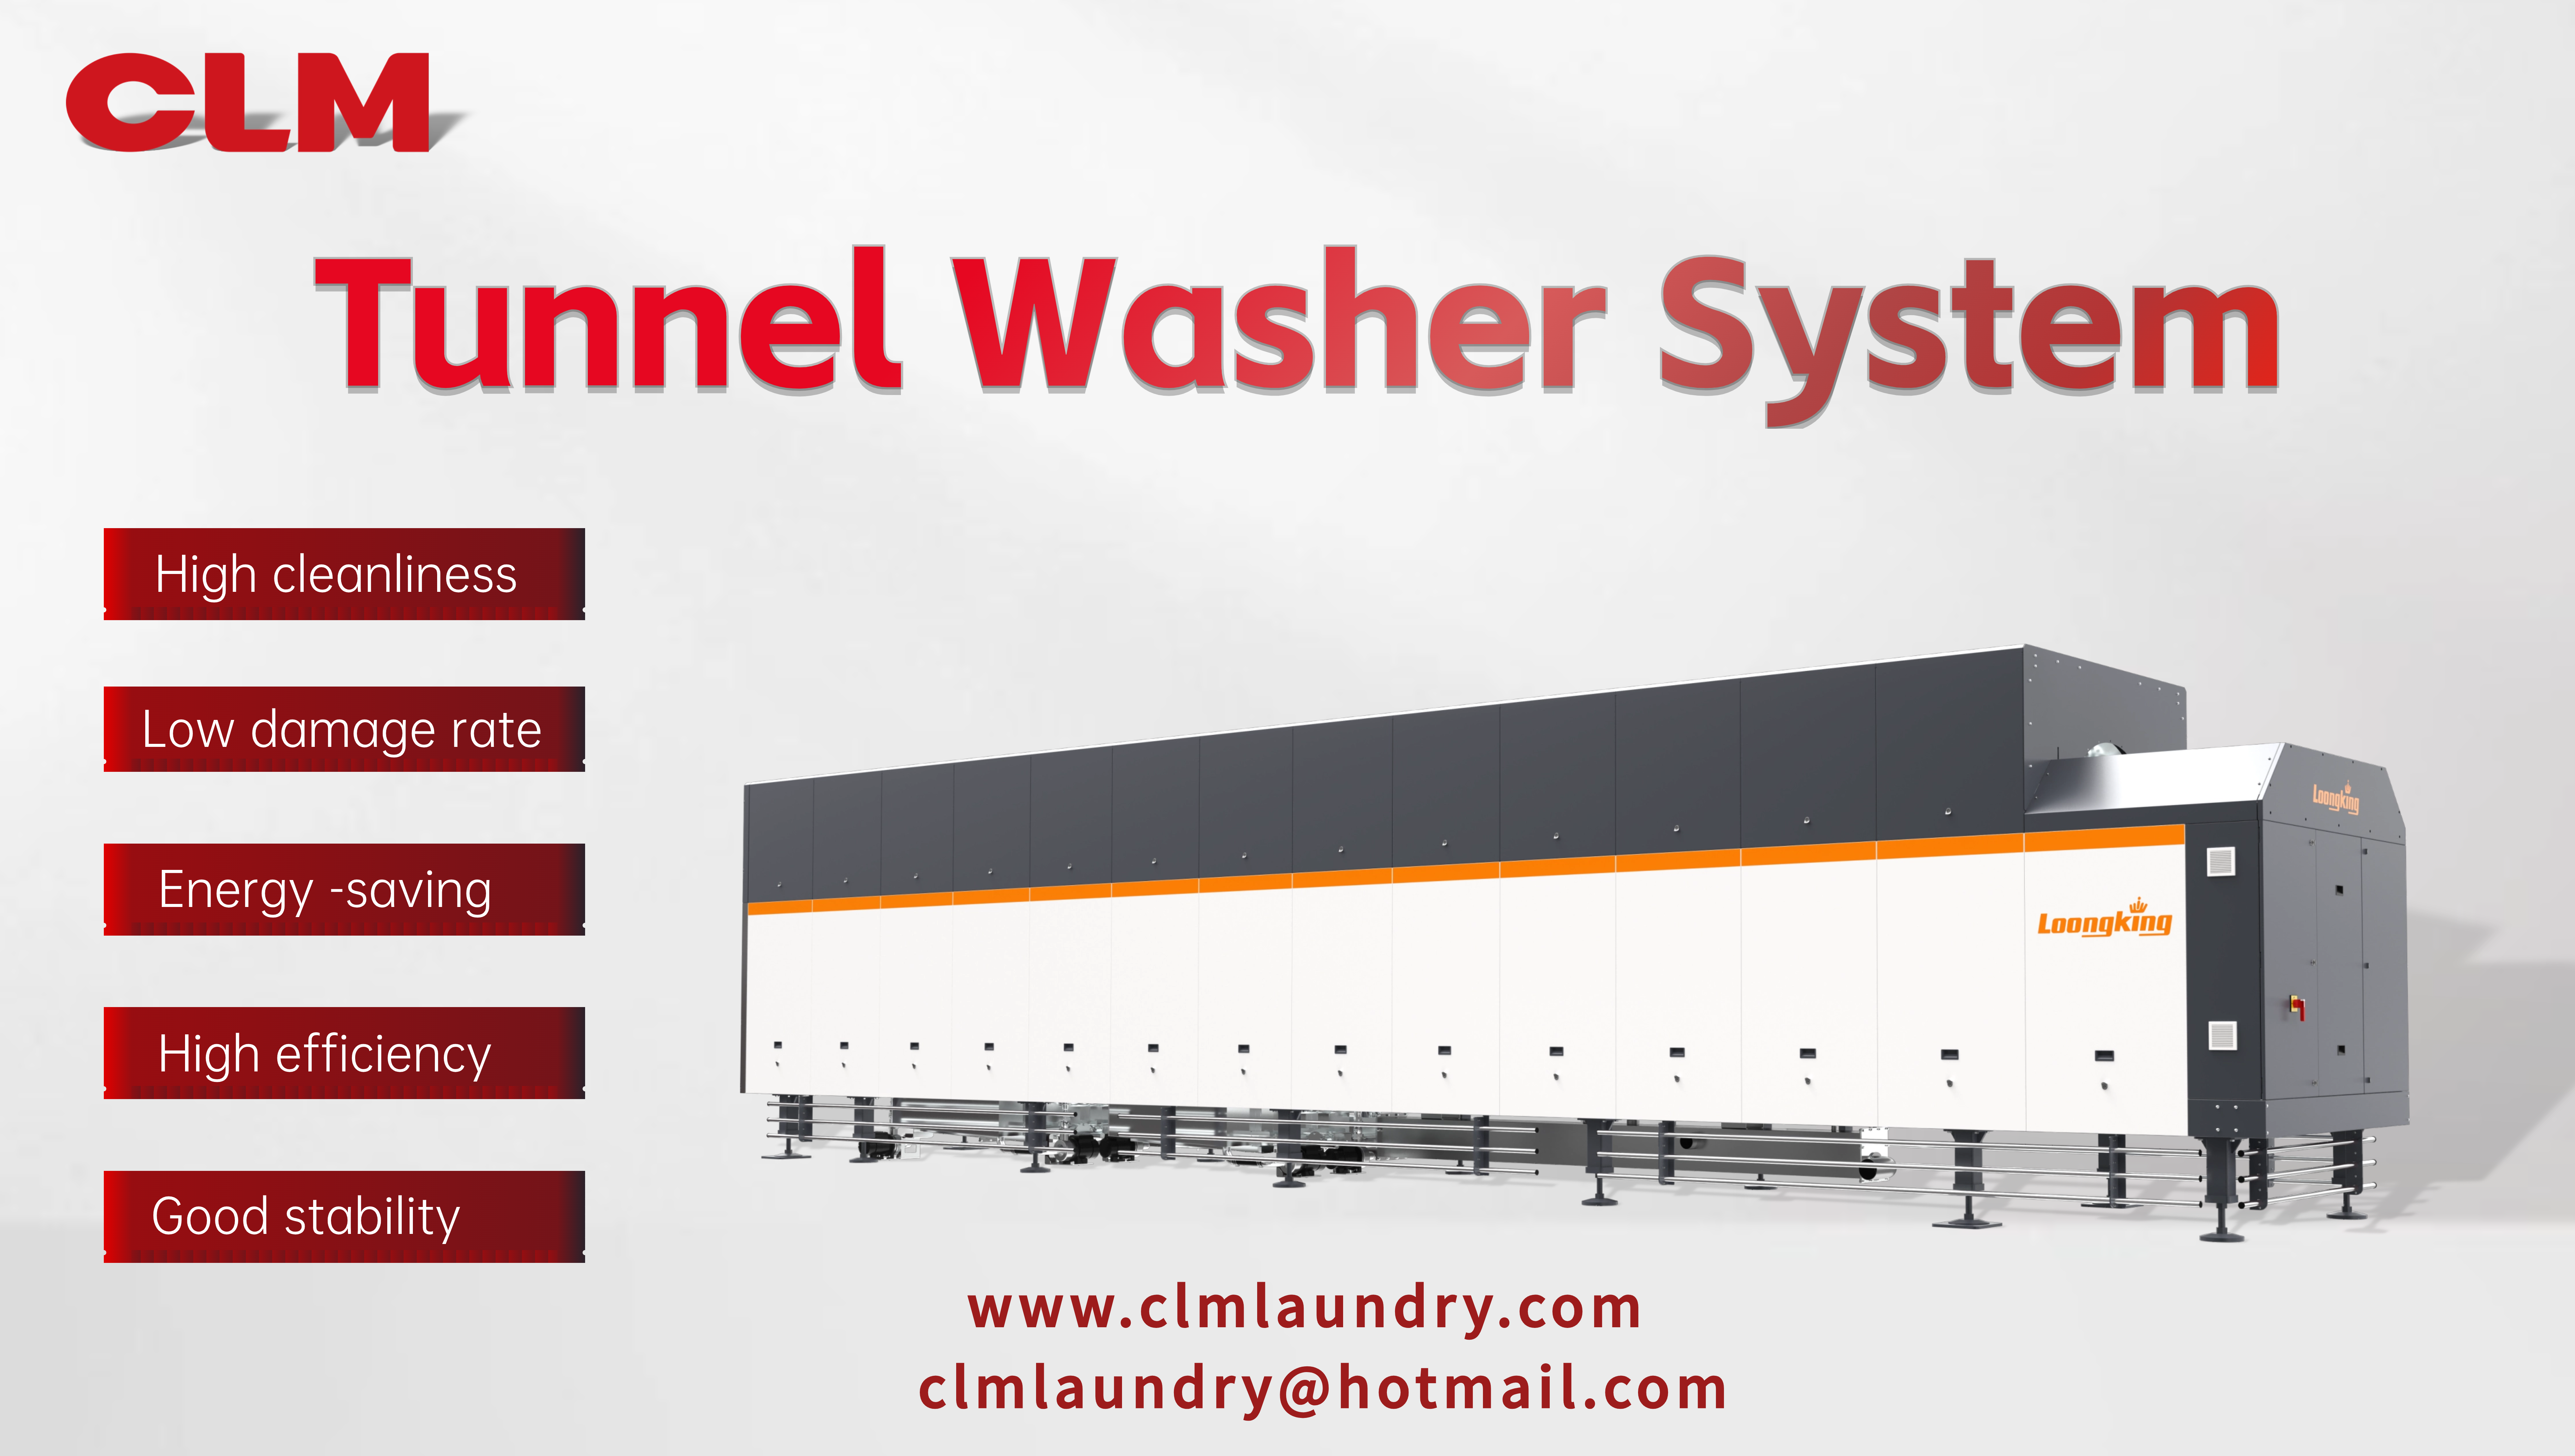 CLM tunnel washer system achieves a washing capacity of 1.8 tons per hour with just one employee!